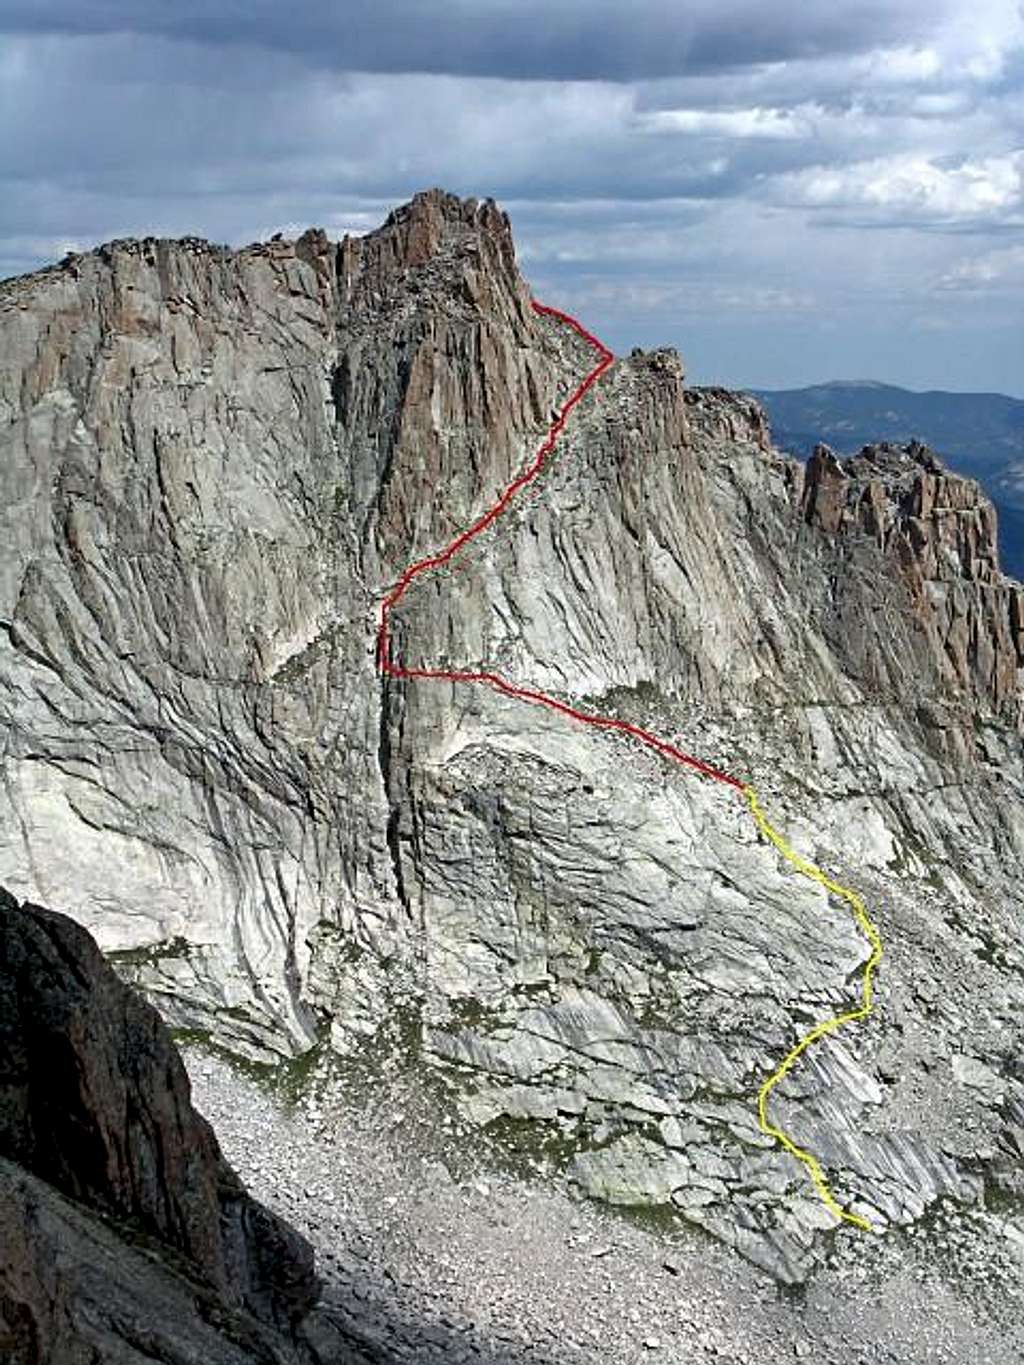 The Summit Ramp Route